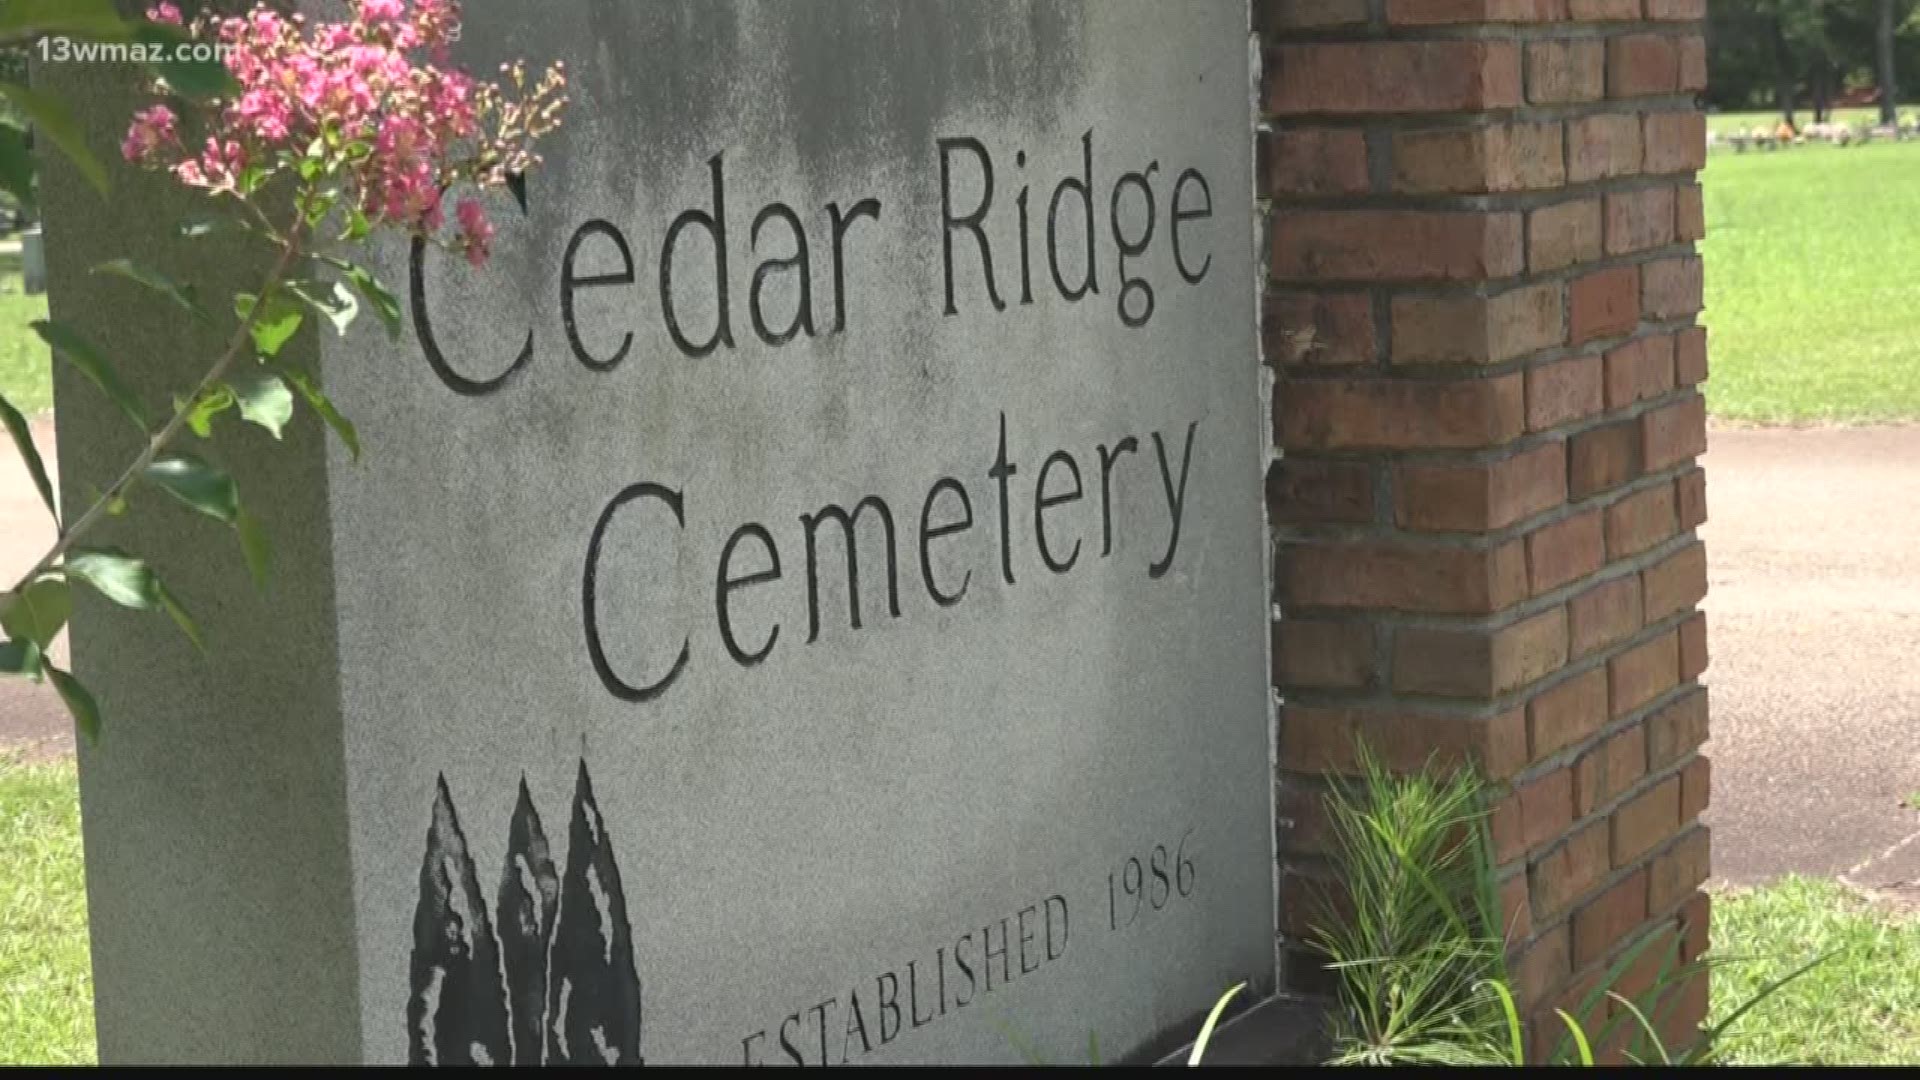 We found documents dating back almost 20 years that raised concerns about former Coroner Jerry Bridges' funeral home and cemetery